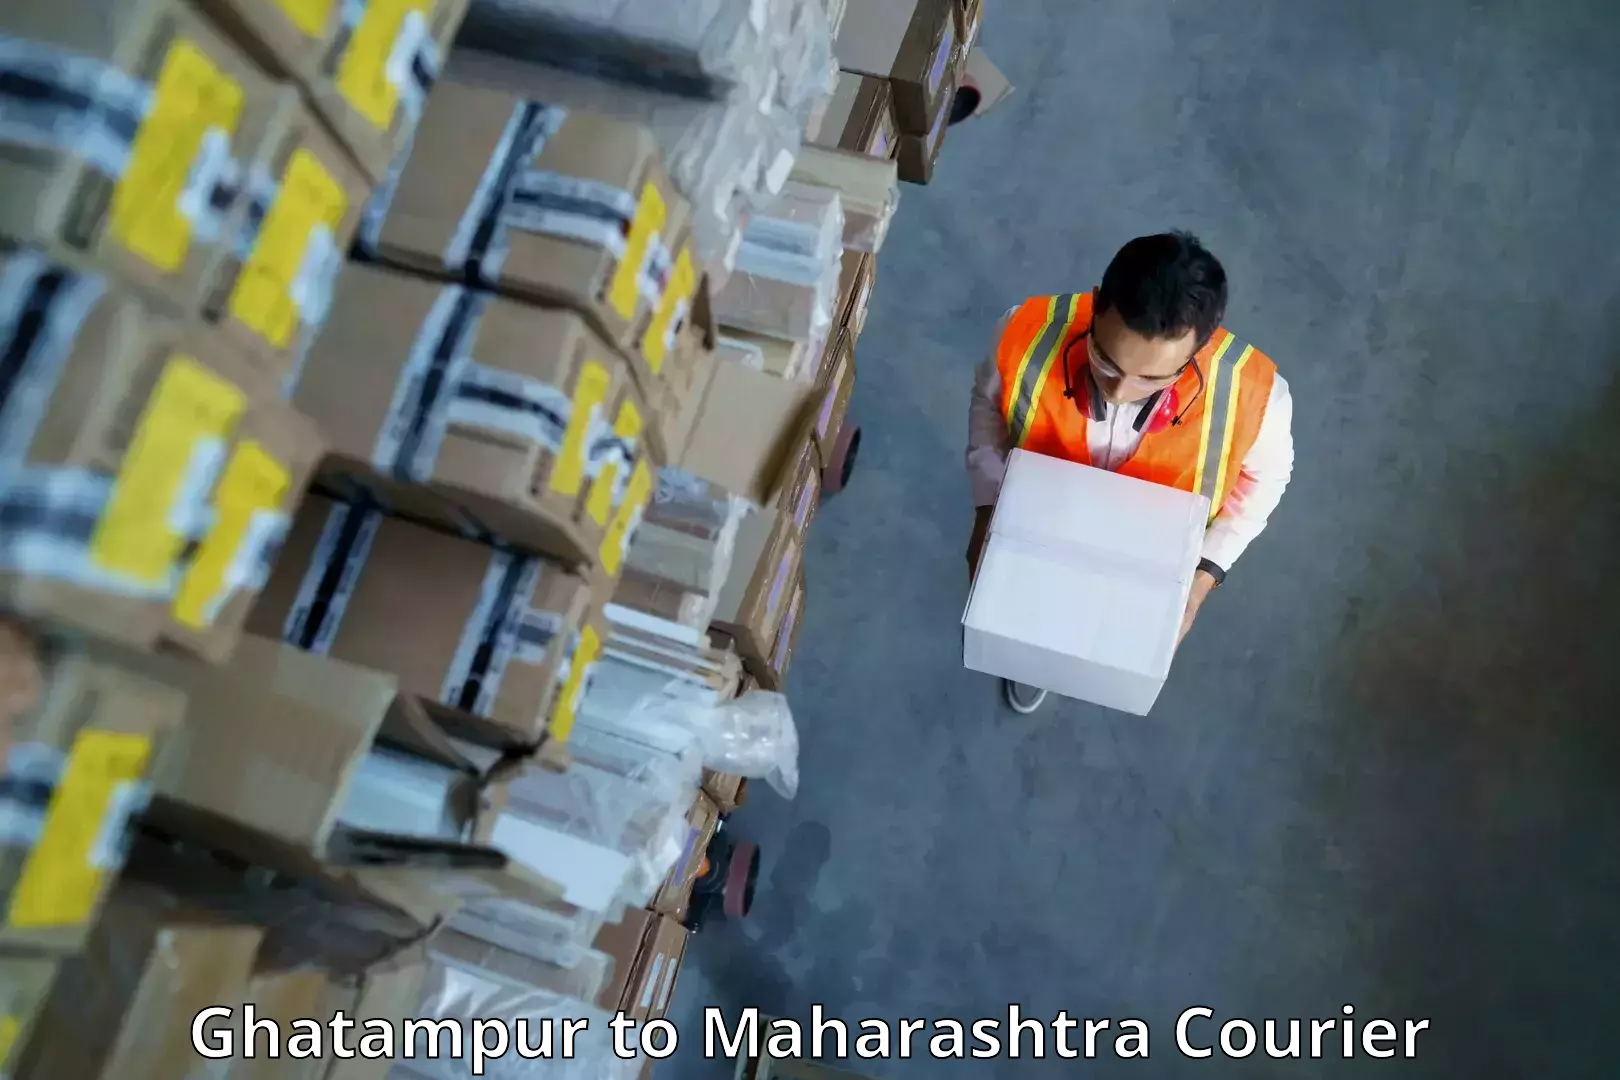 Multi-carrier shipping in Ghatampur to Maharashtra